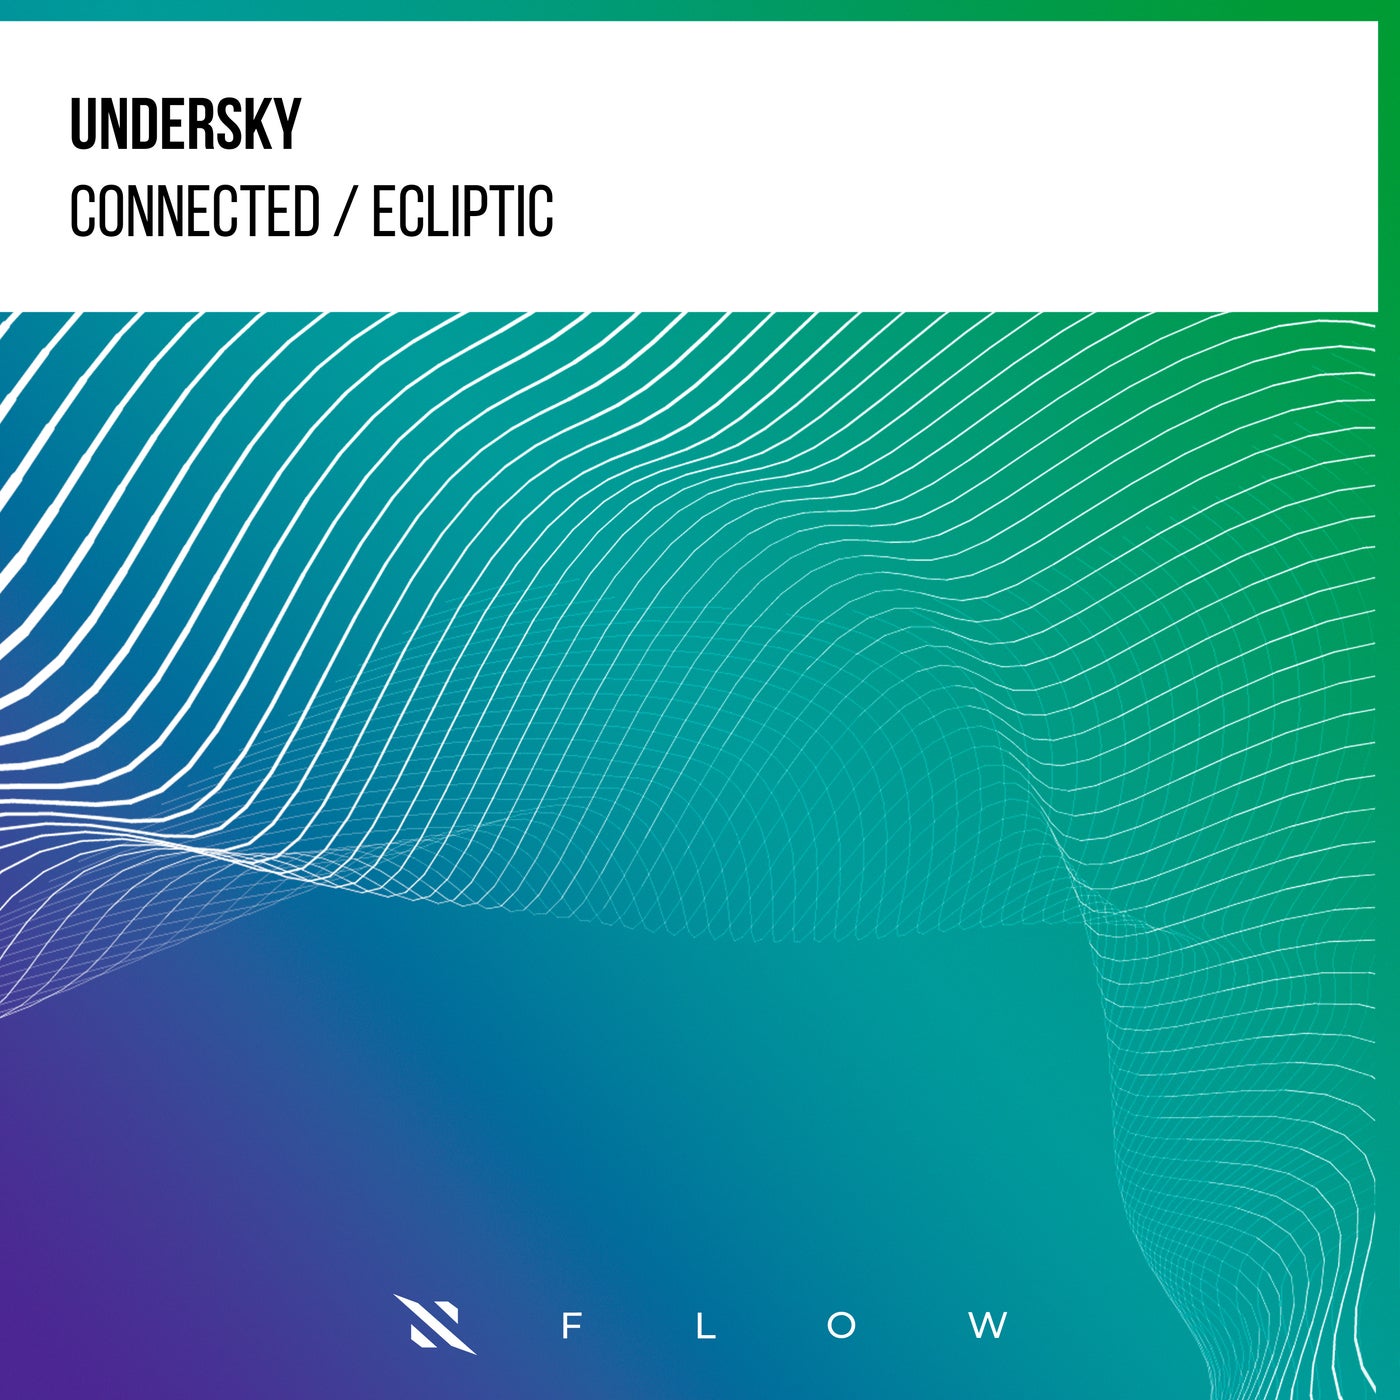 Connected / Ecliptic